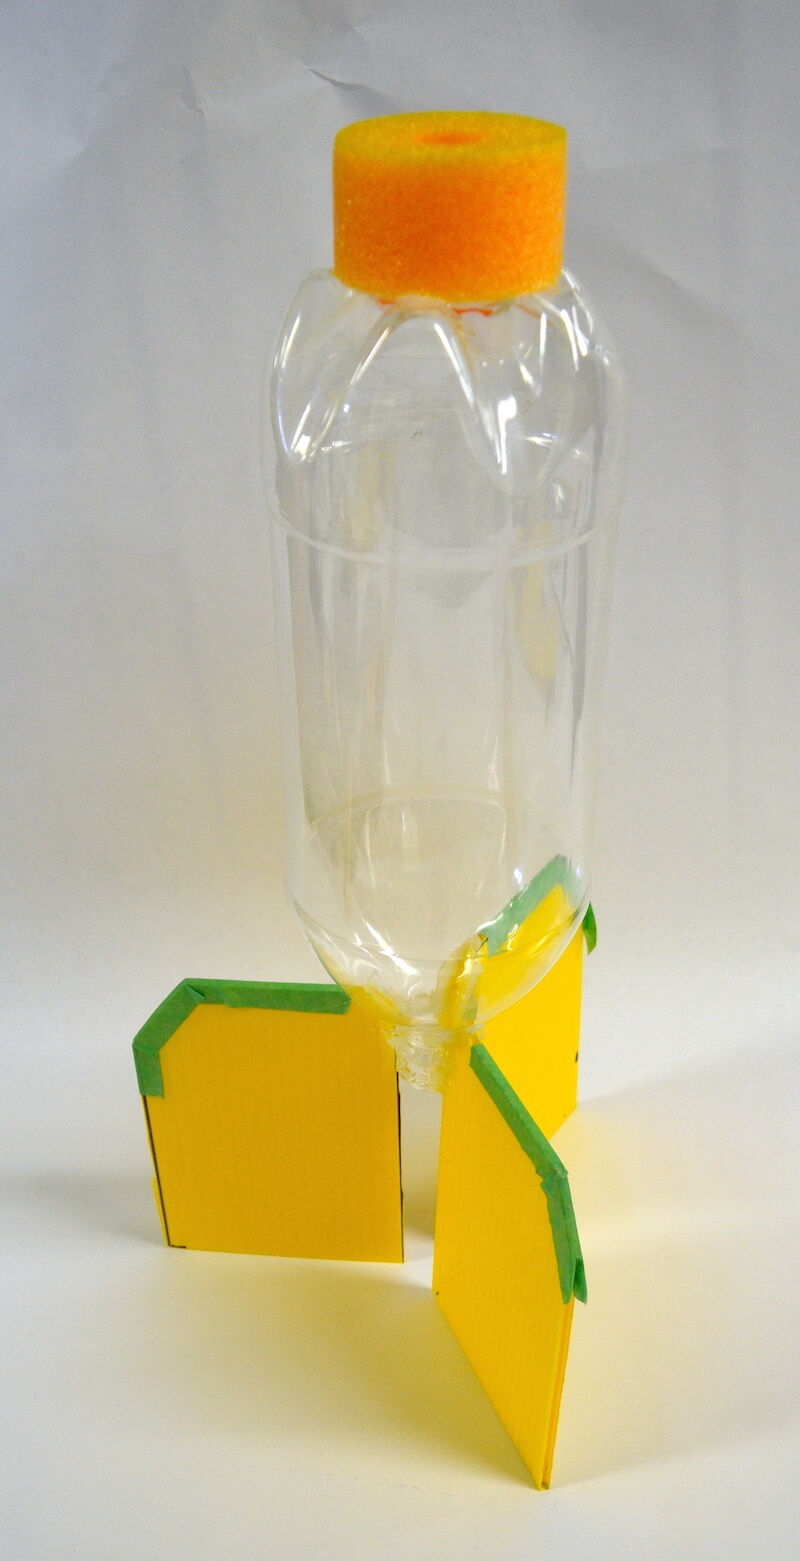 Make a water rocket! The homemade water rocket is complete, fins and all!